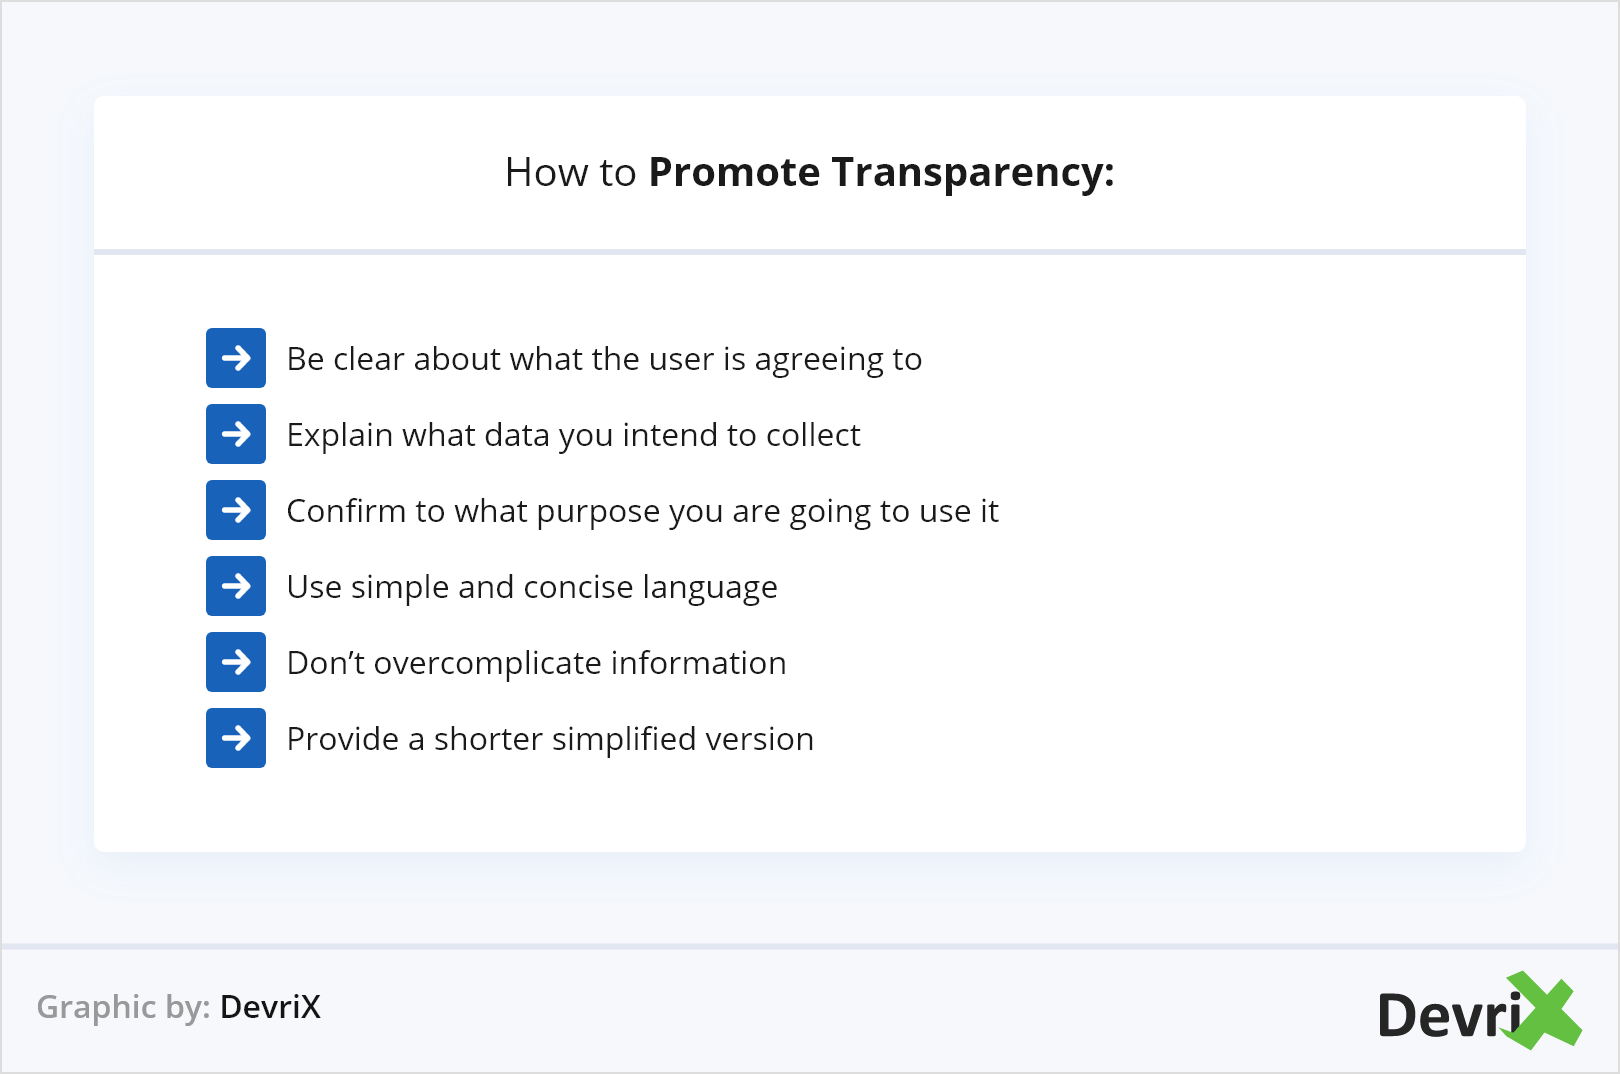 How to Promote Transparency